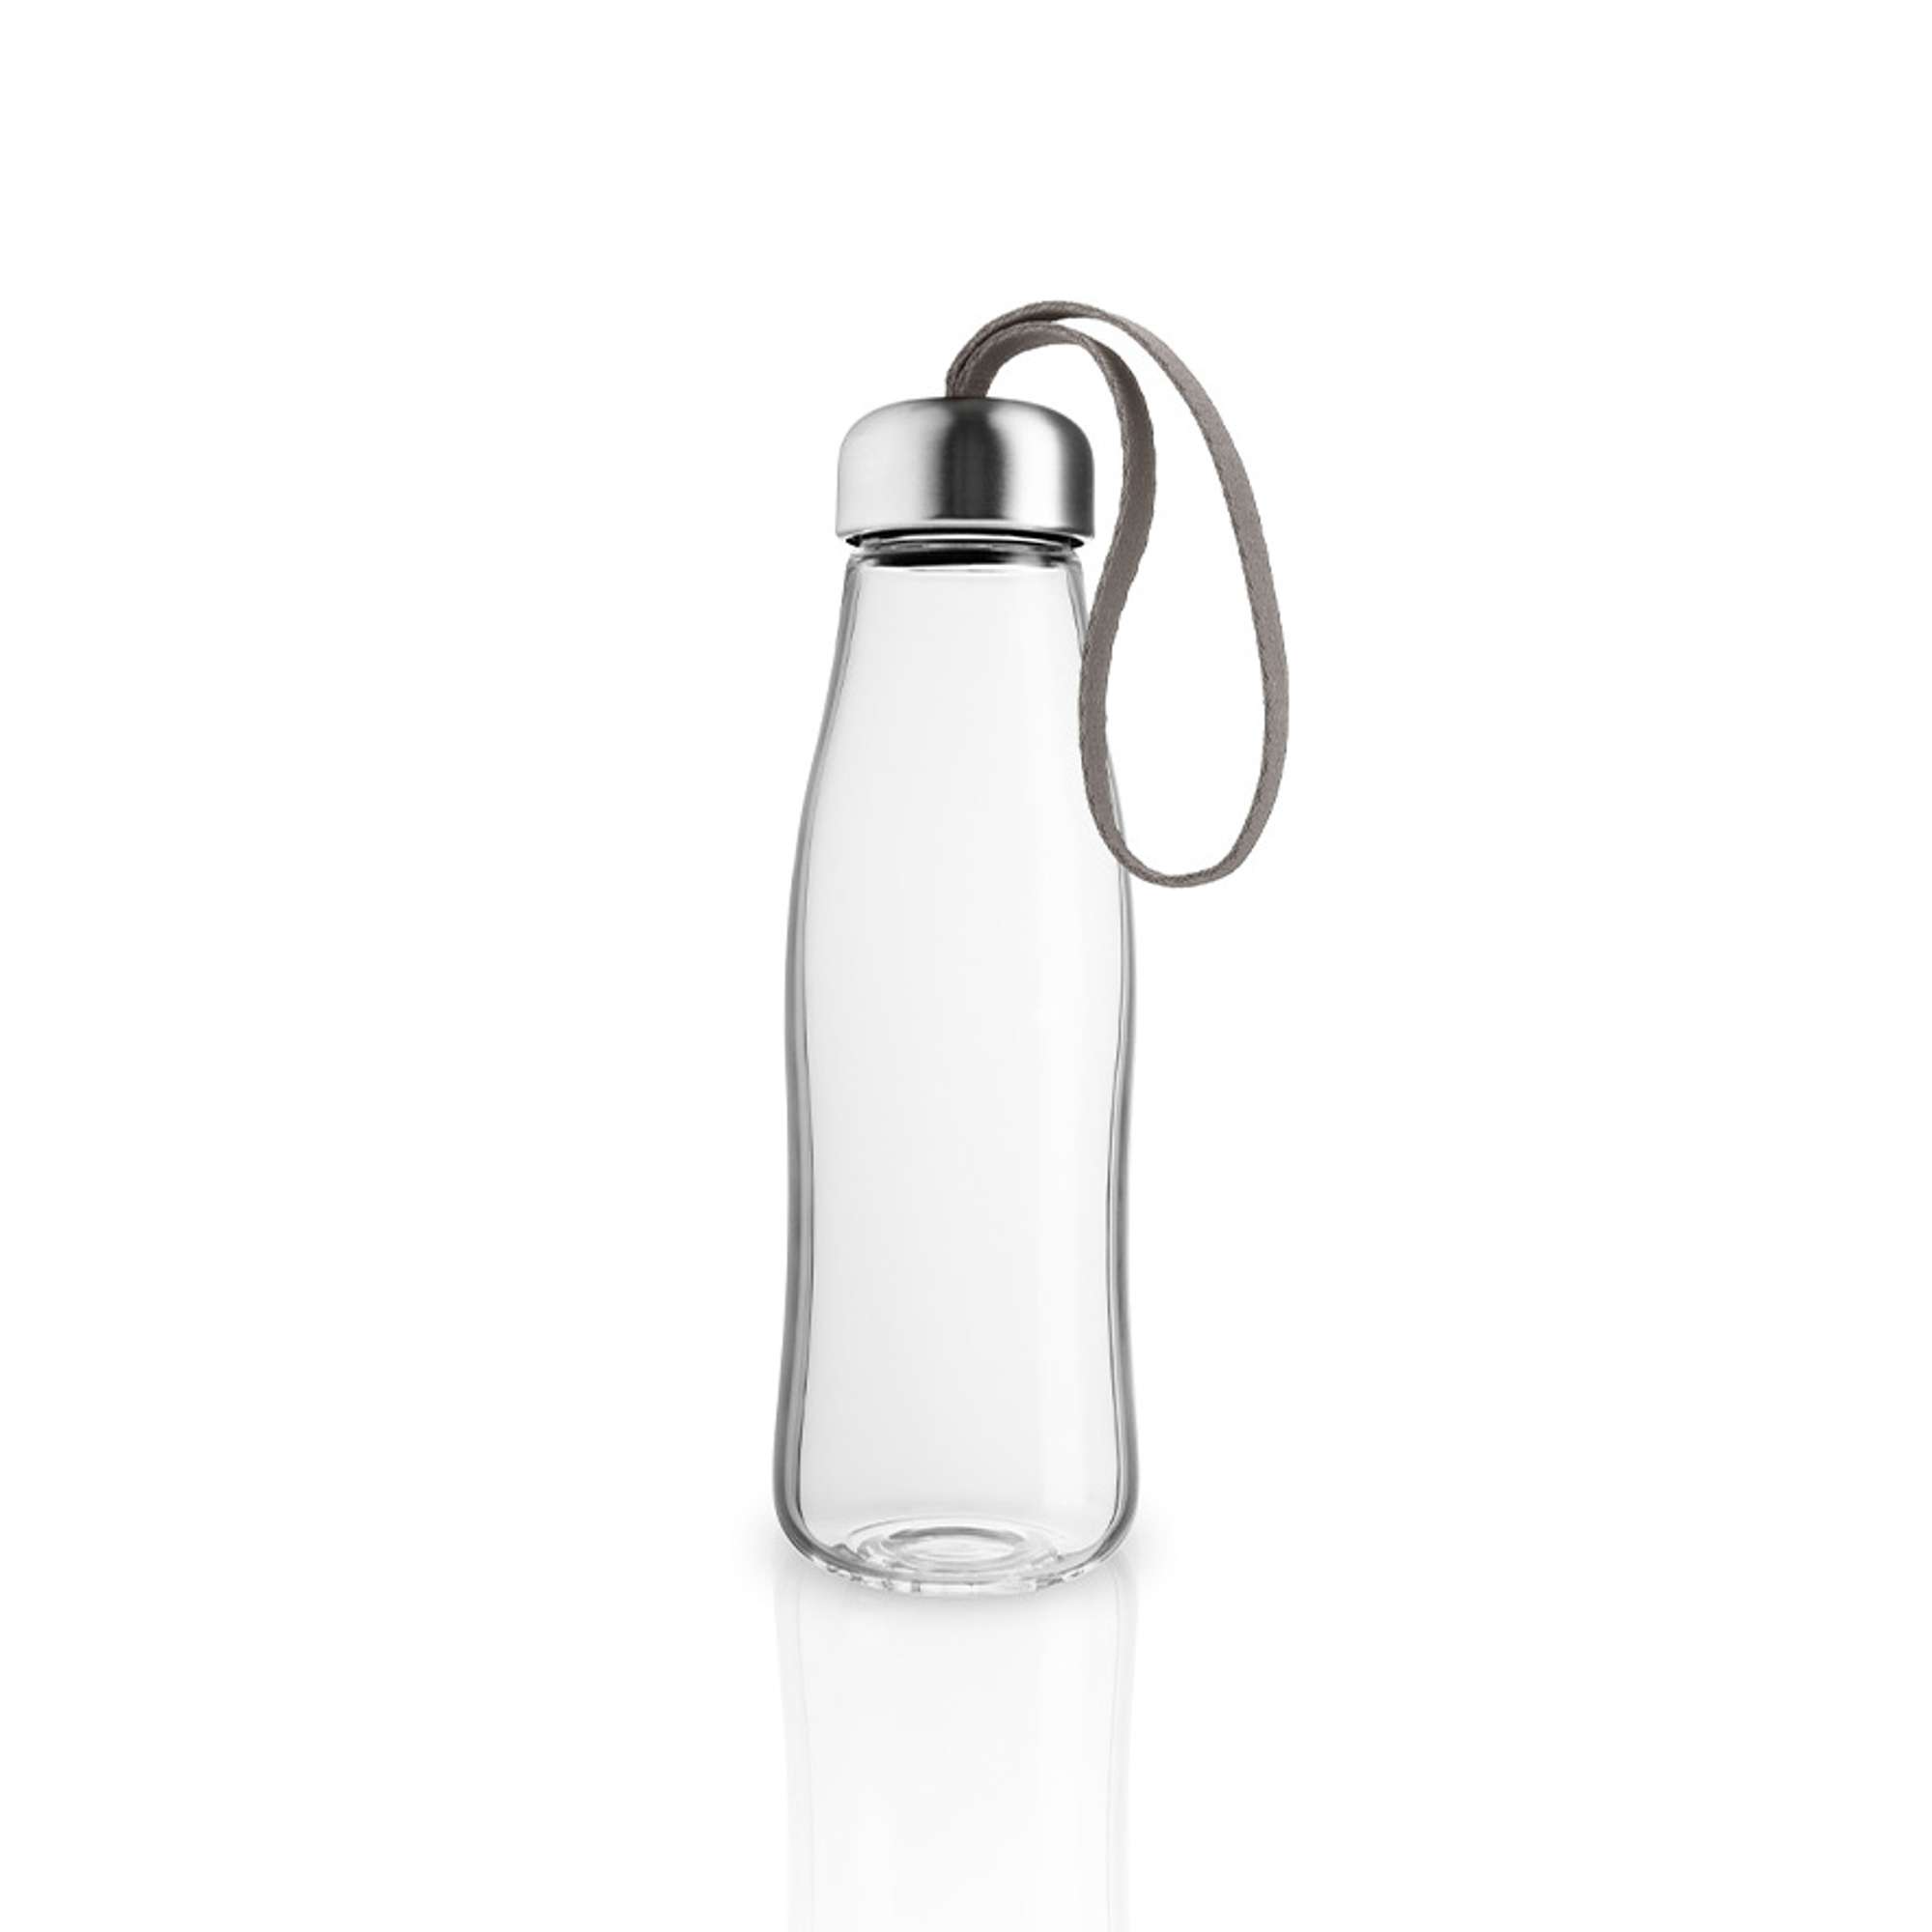 Glass drinking bottle - 0.5 liters - Taupe